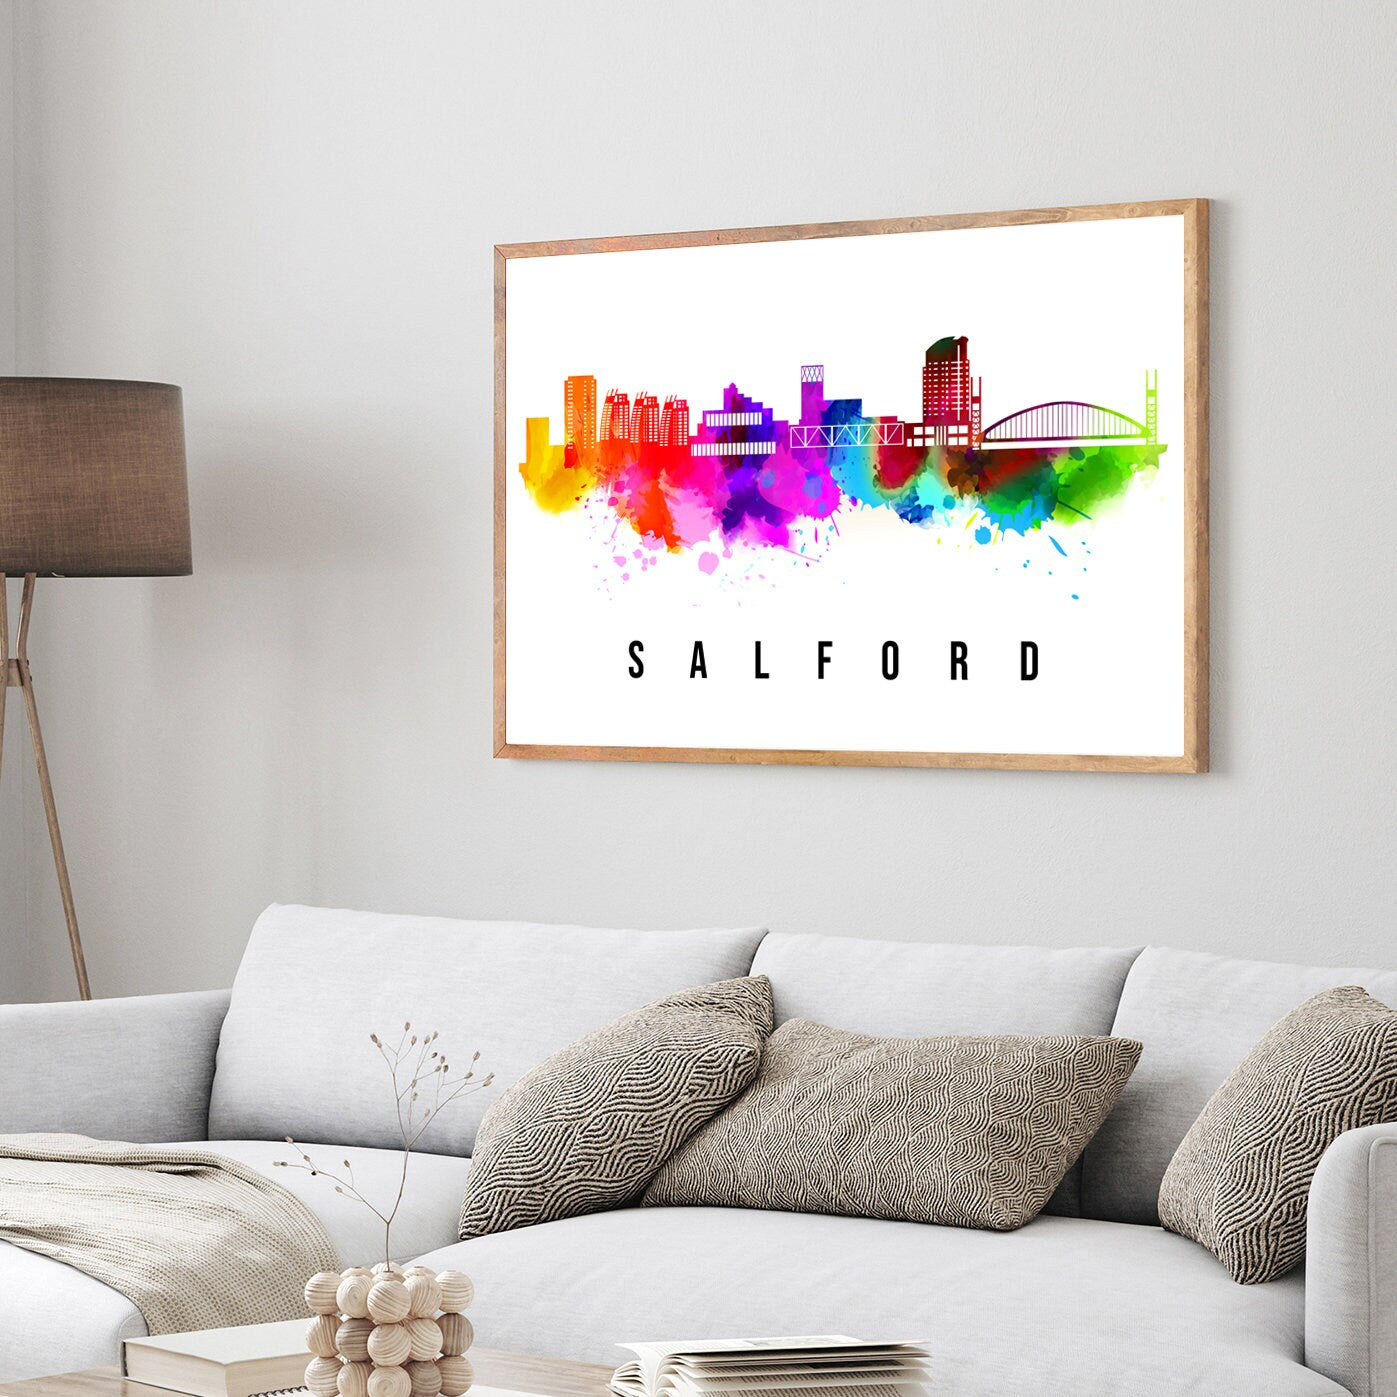 Salford England Poster, Skyline poster cityscape poster, Landmark City Illustration poster, Home wall decoration, Office wall art